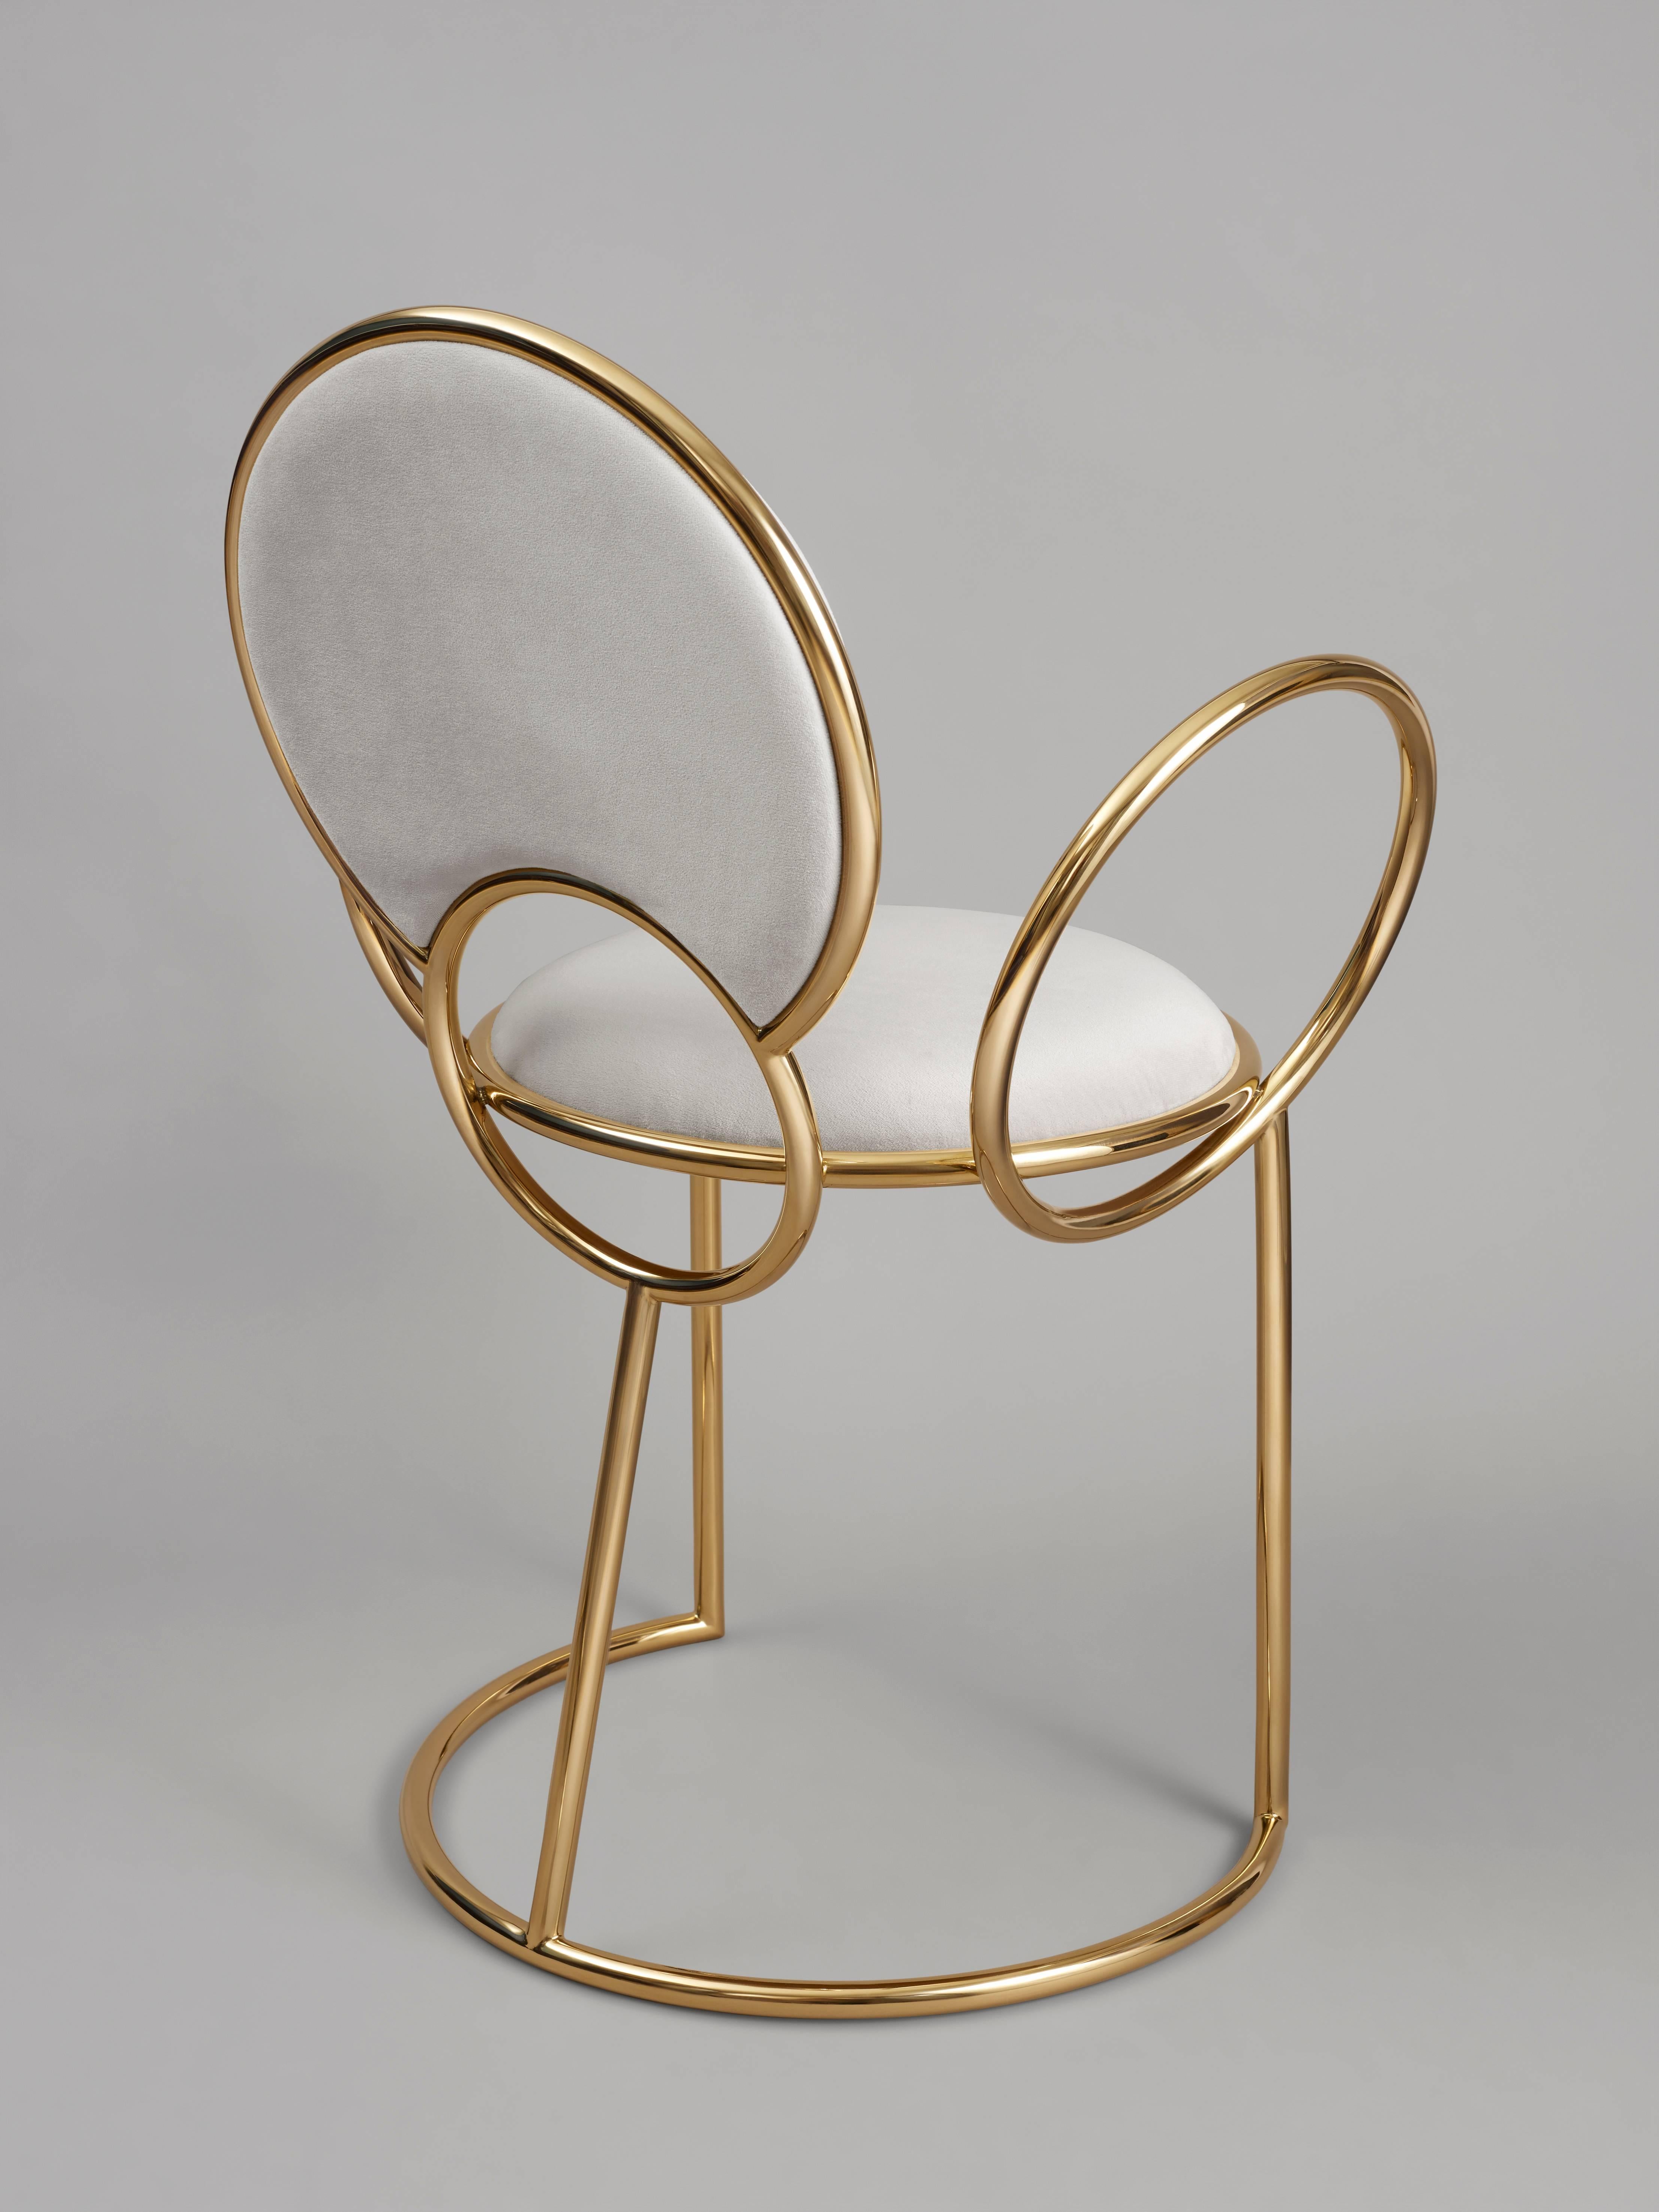 Asian 'Yue Chair' with Delicate Loop Armrests by Studio MVW For Sale